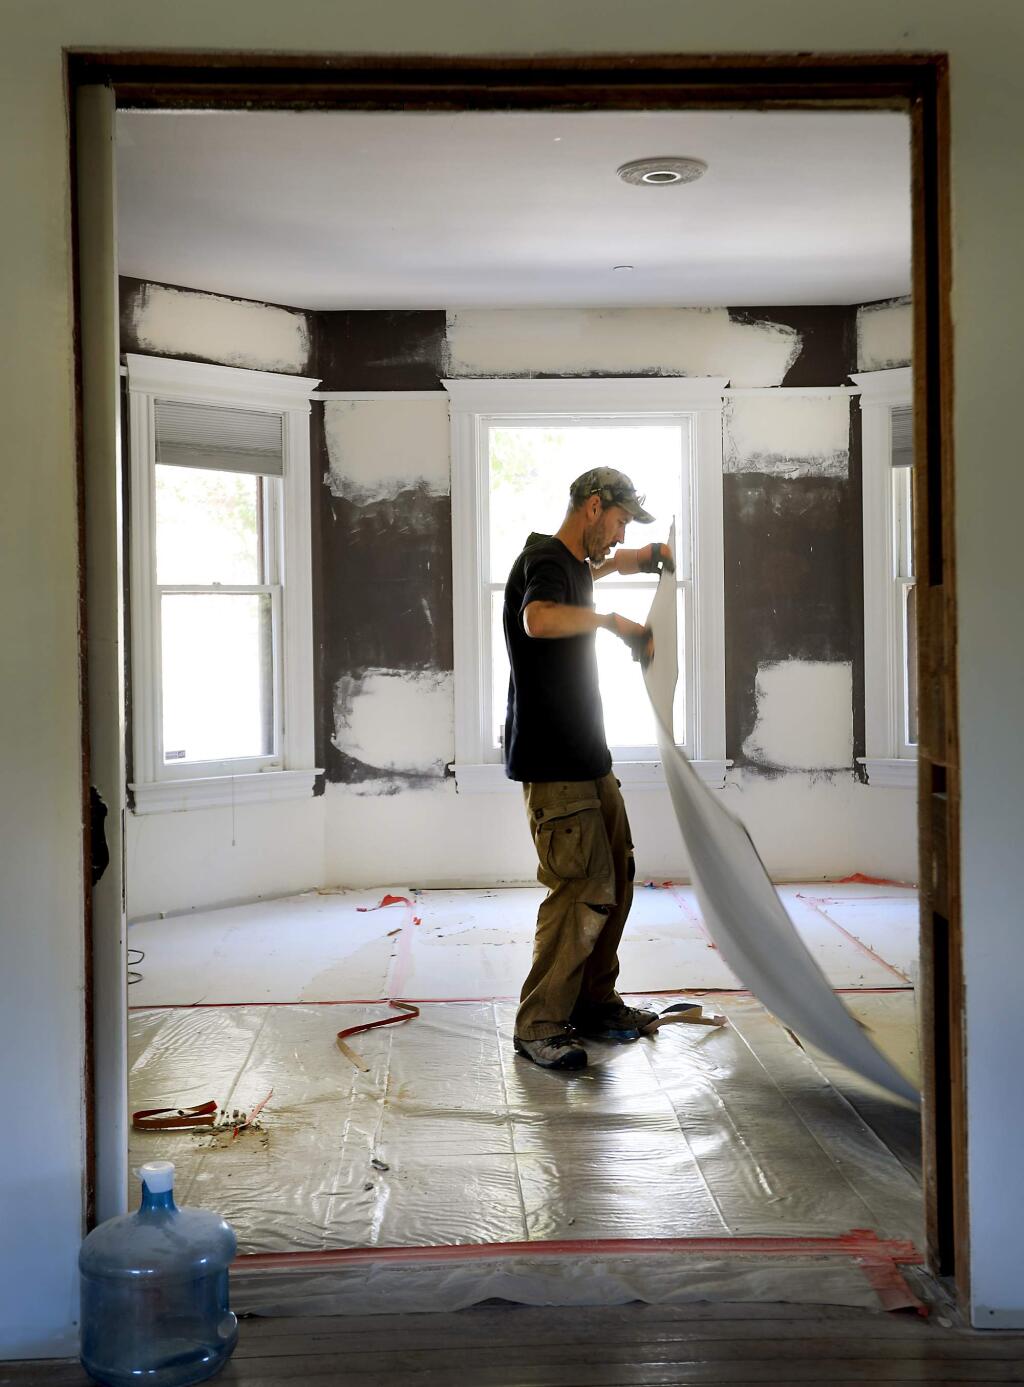 Steve King of Leff Construction Design Build pulls up thermo ply, used to protect wood flooring as a house is remodeled in Petaluma, Wednesday August 23, 2017. (Kent Porter / The Press Democrat) 2017